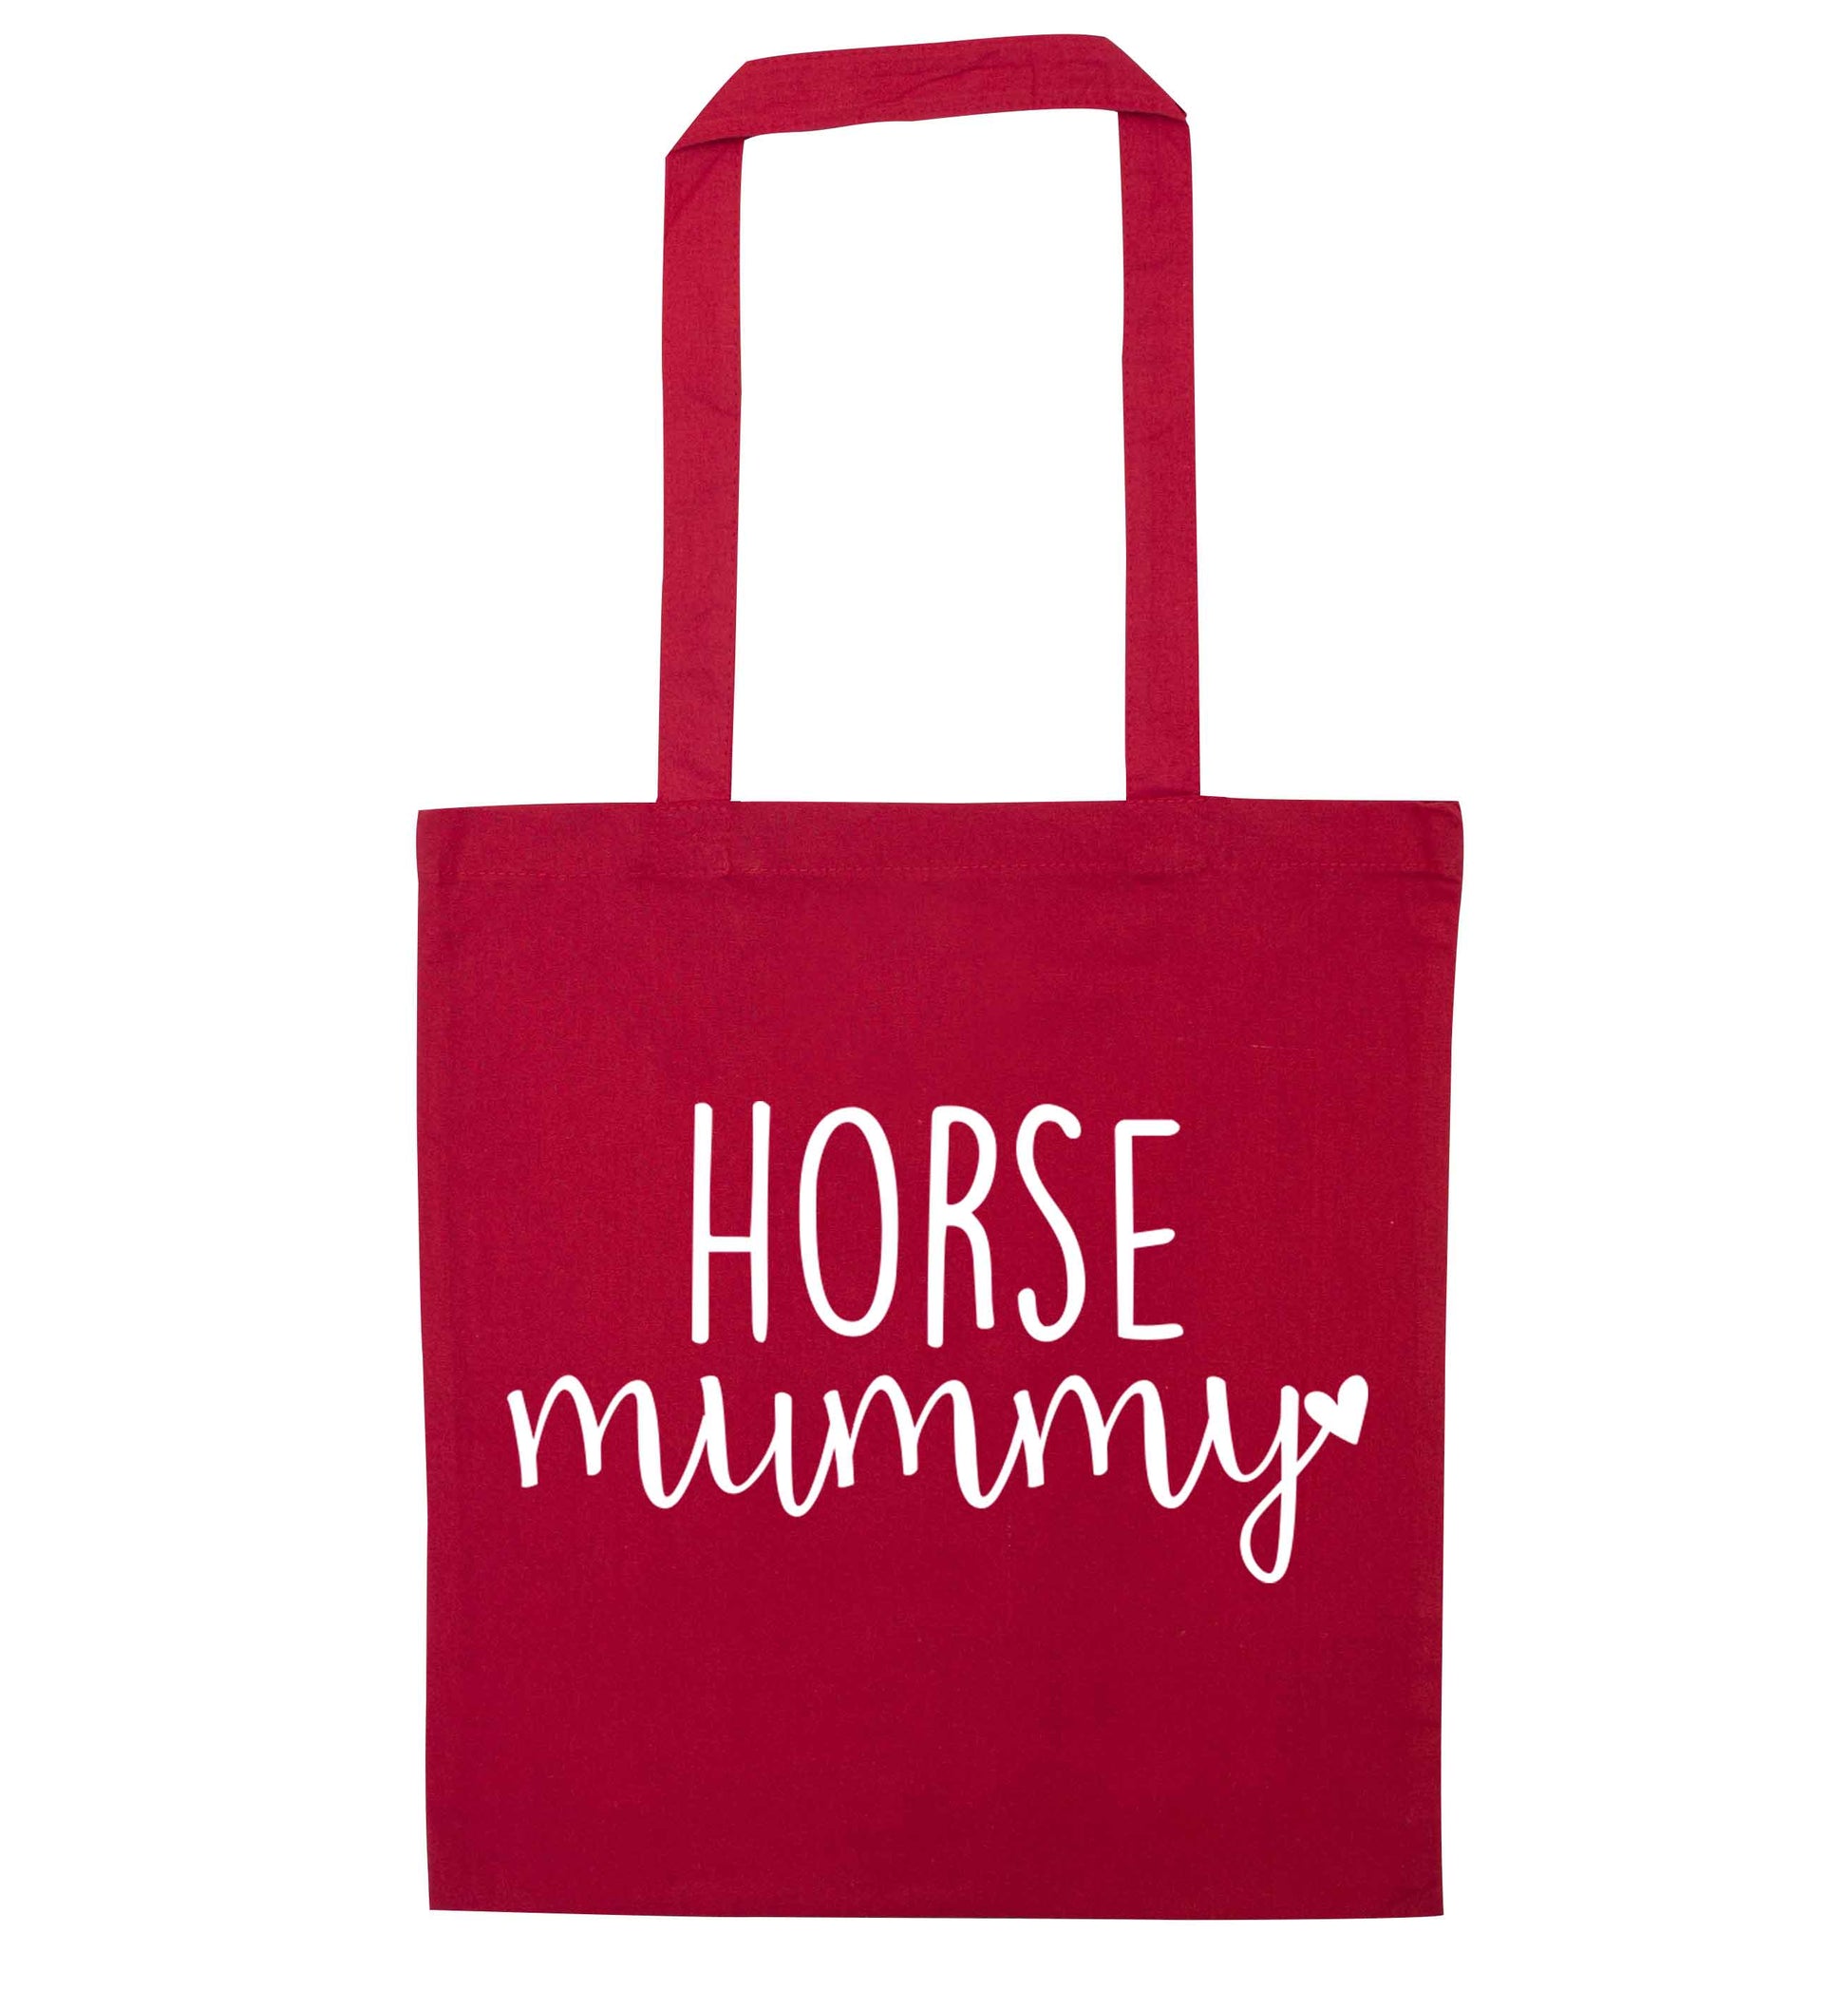 Horse mummy red tote bag